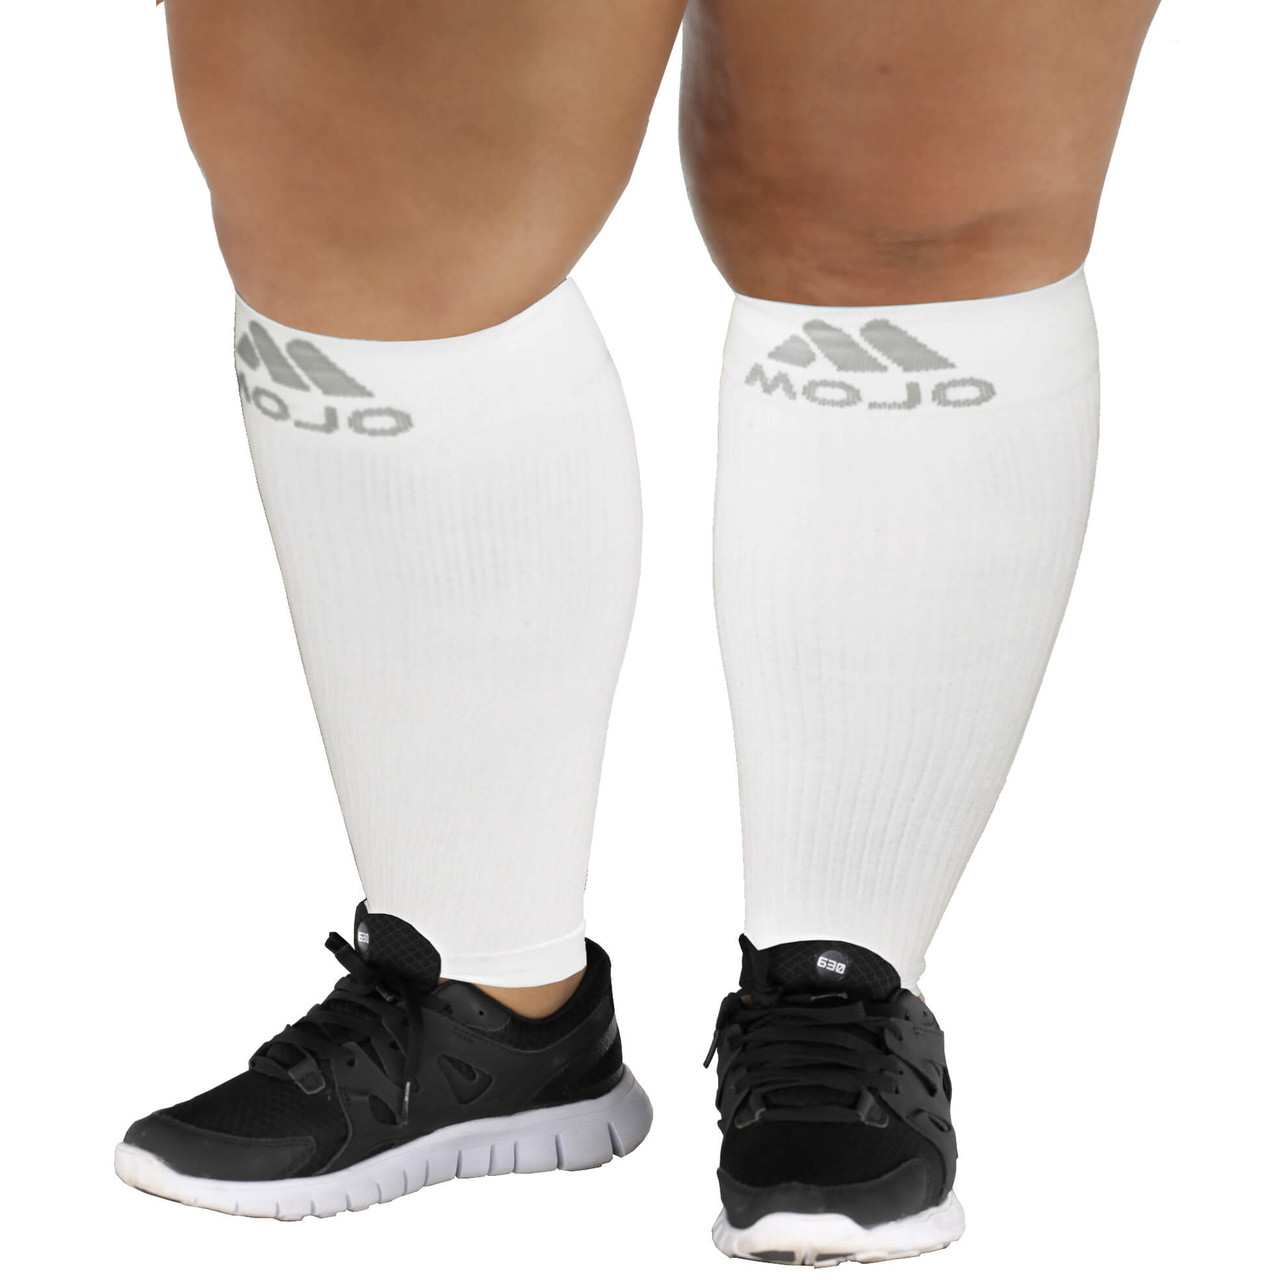 Mojo Plus Size Compression Calf Sleeves, Firm Support 20-30mmHg